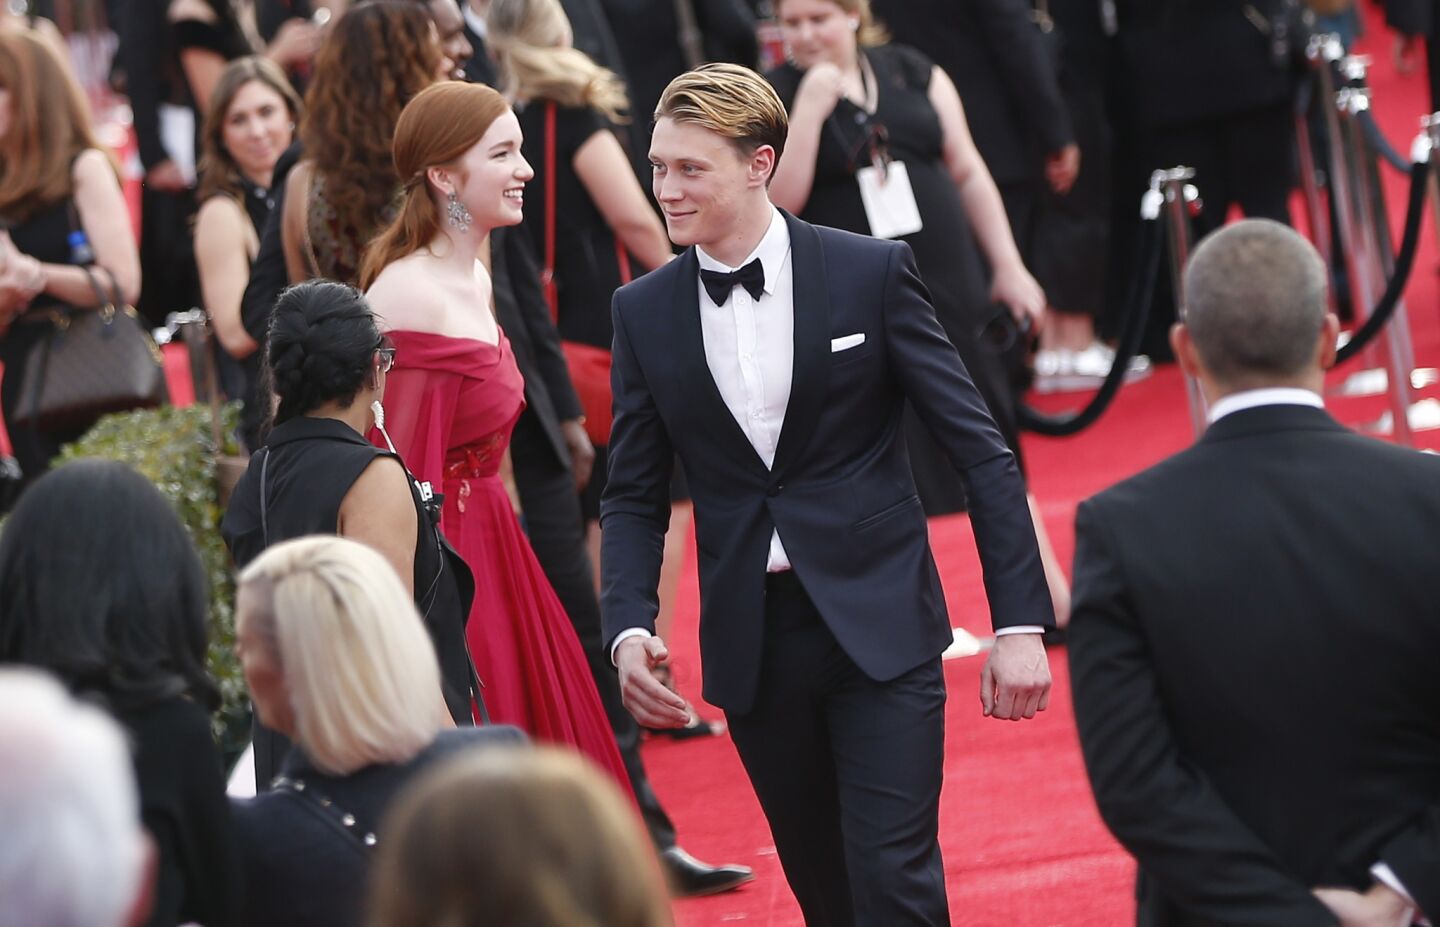 LOS ANGELES, CA - January 29, 2017-Actor George MacKay during the arrivals at the 23rd Annual Screen Actors Guild Awards at the Shrine Auditorium in Los Angeles, CA on Sunday, January 29, 2017. (Jay L. Clendenin / Los Angeles Times)